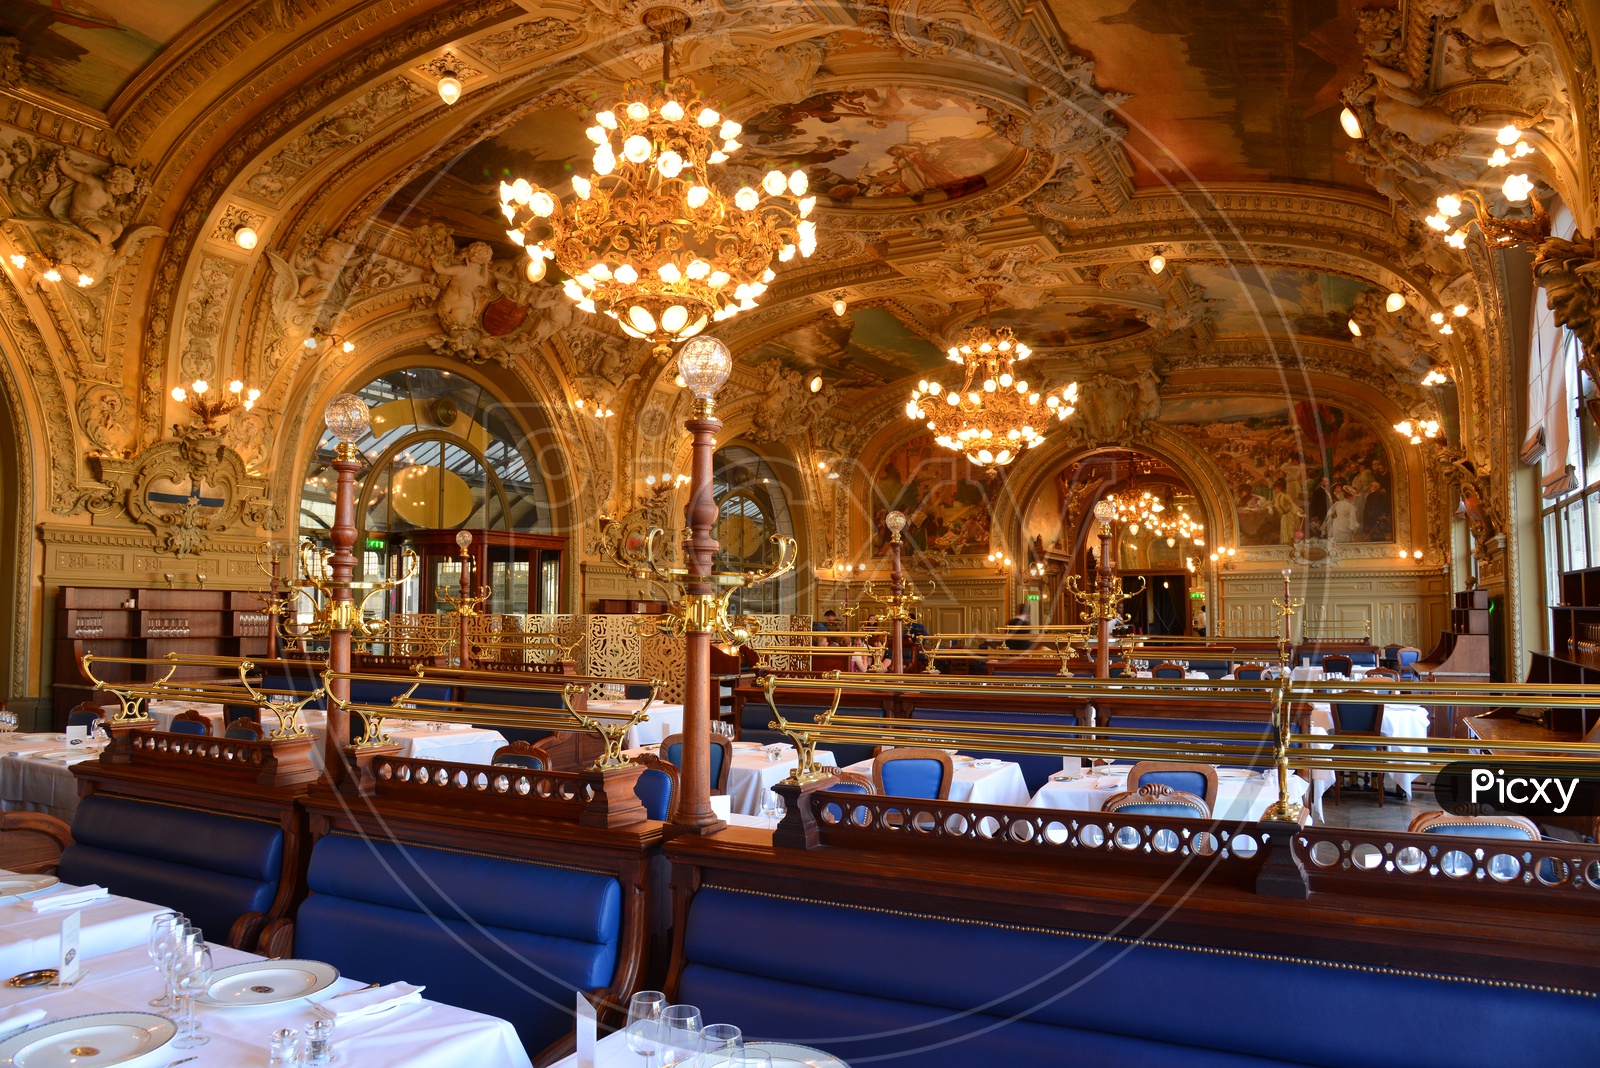 Interior of Grand Palace Hotel With Dining Tables And Chandeliers